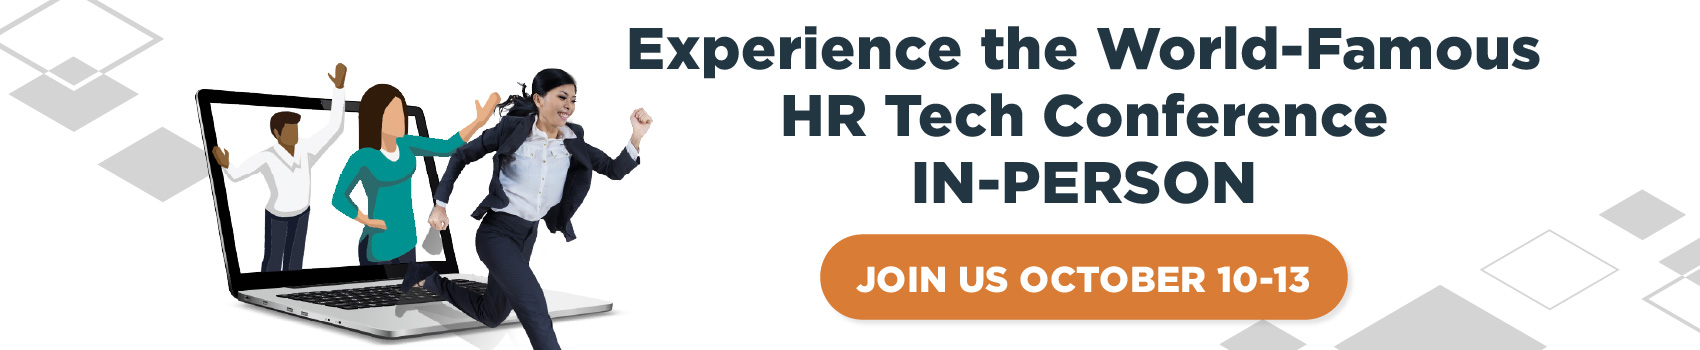 Experience the World-Famous HR Tech Conference In-Person